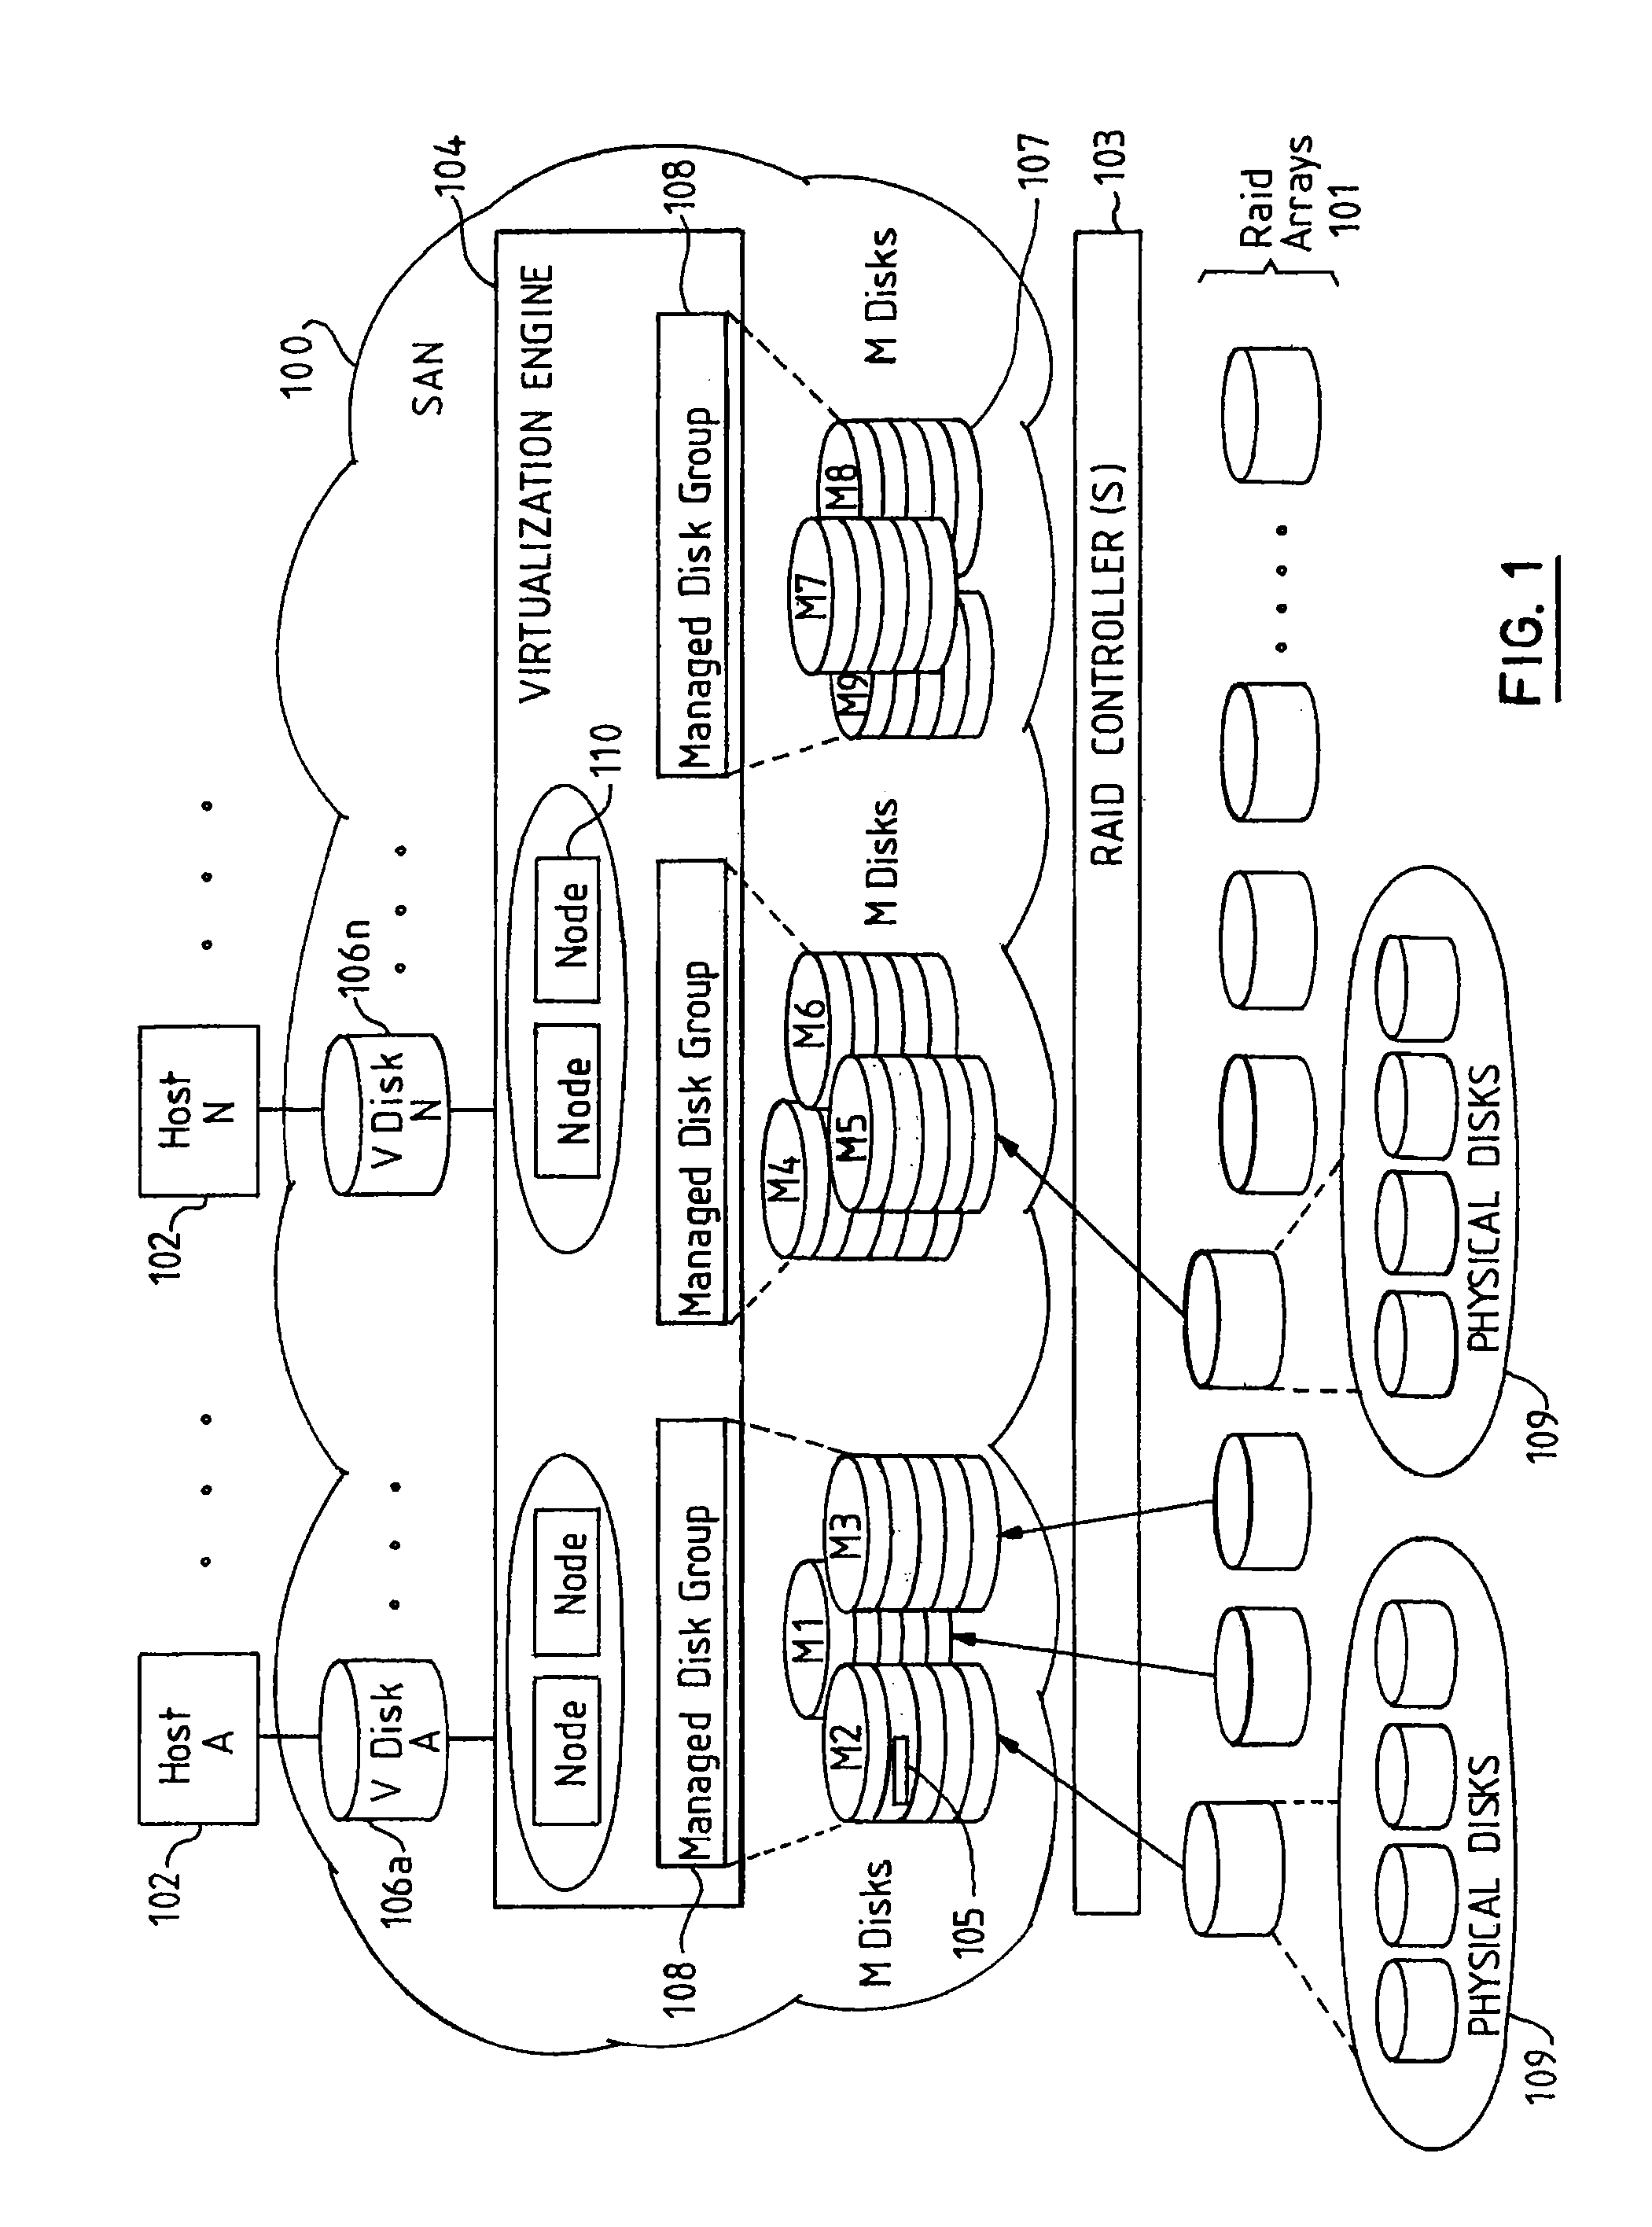 Method, system and computer program product for managing the storage of data